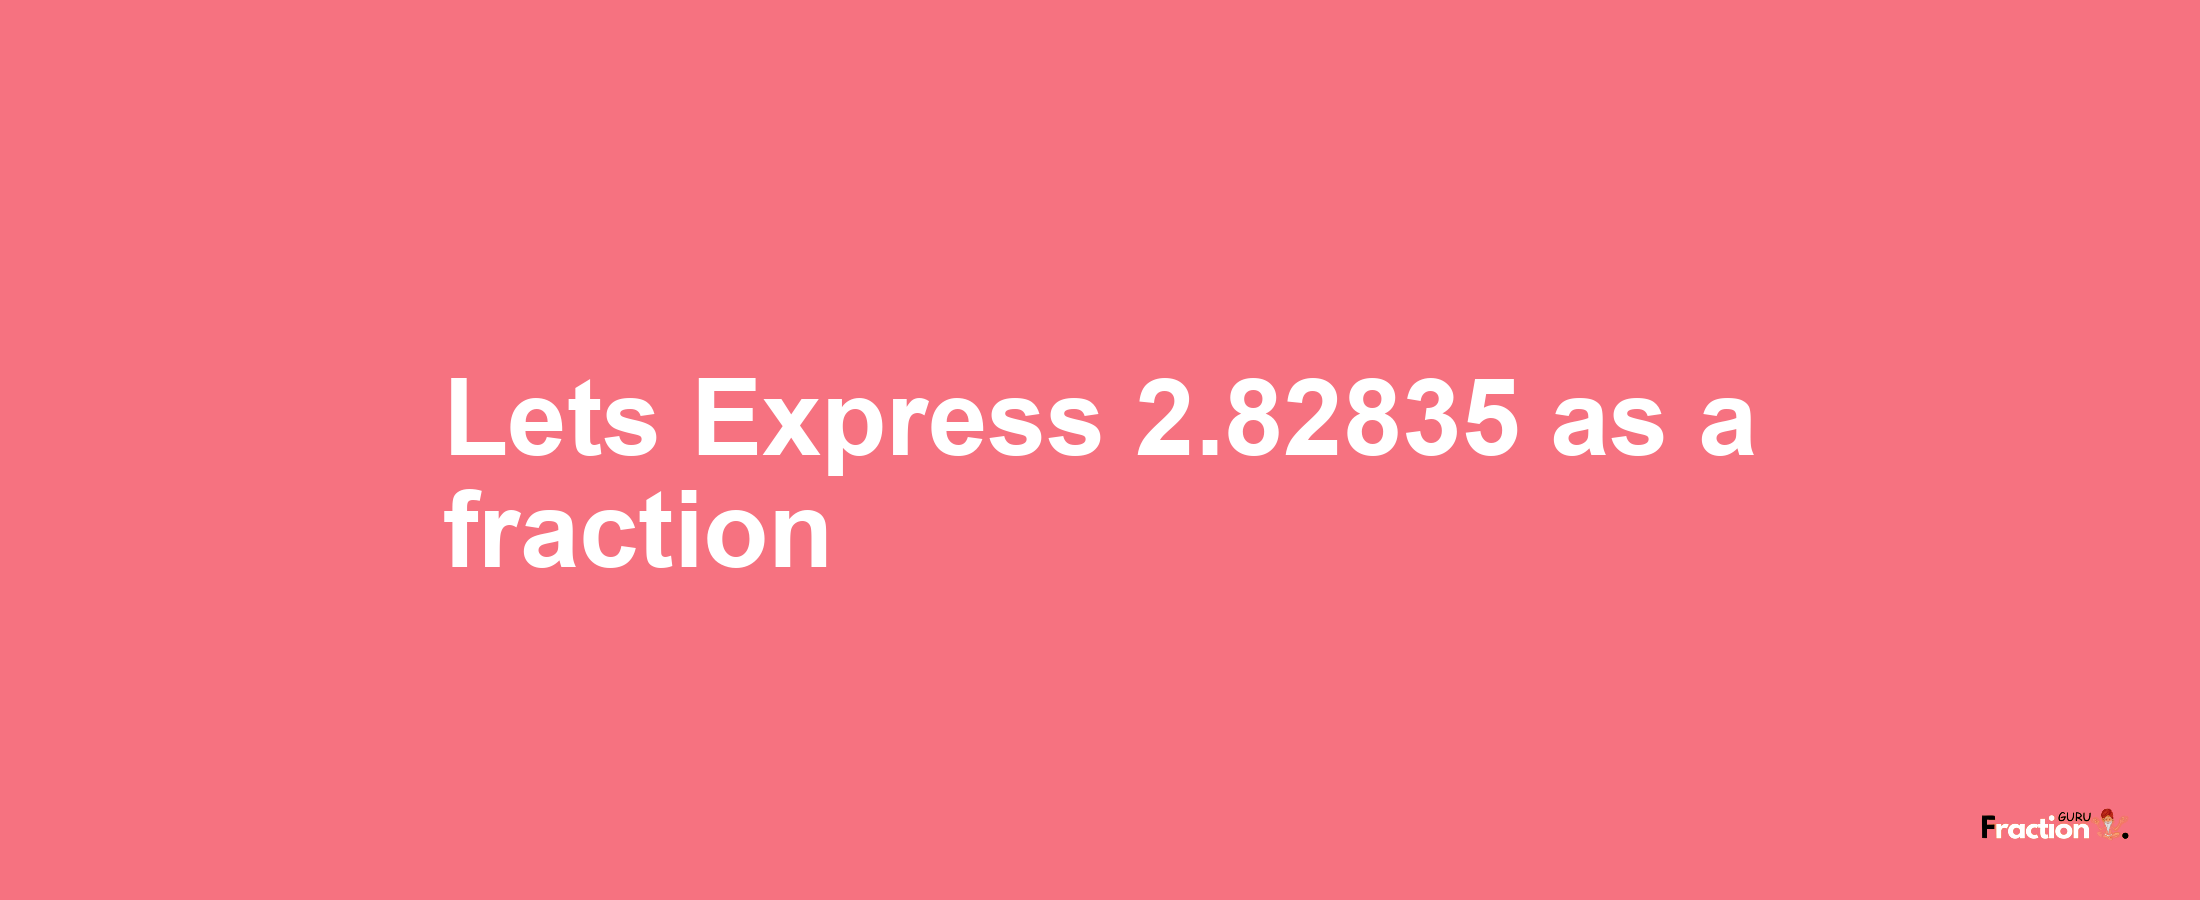 Lets Express 2.82835 as afraction